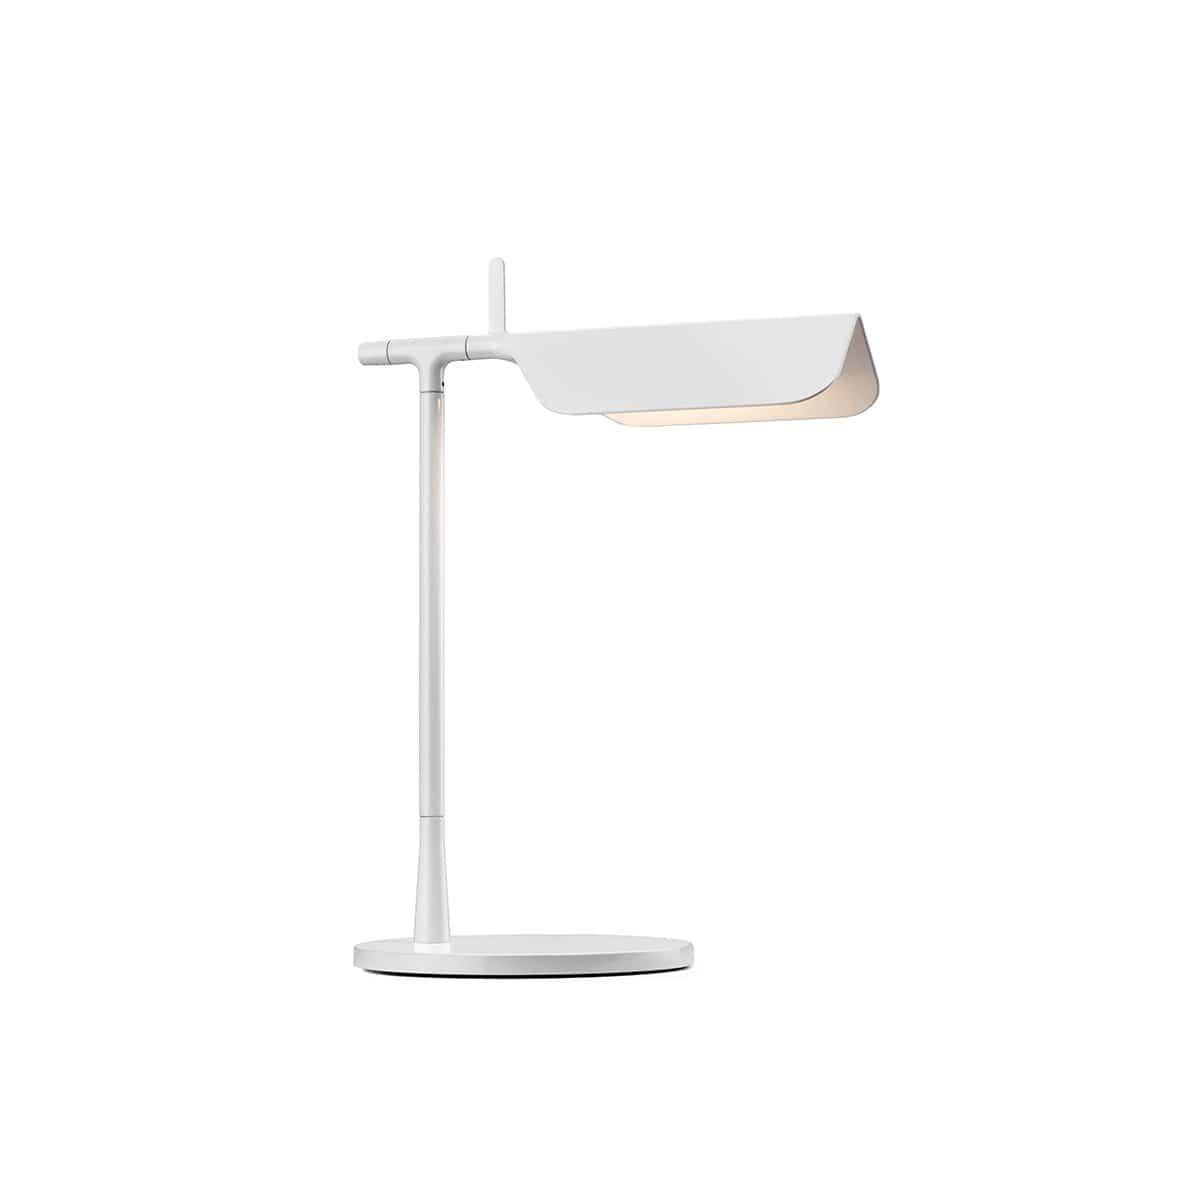 Tab Table 90° Rotatable Head - by Flos exclusively through Curated